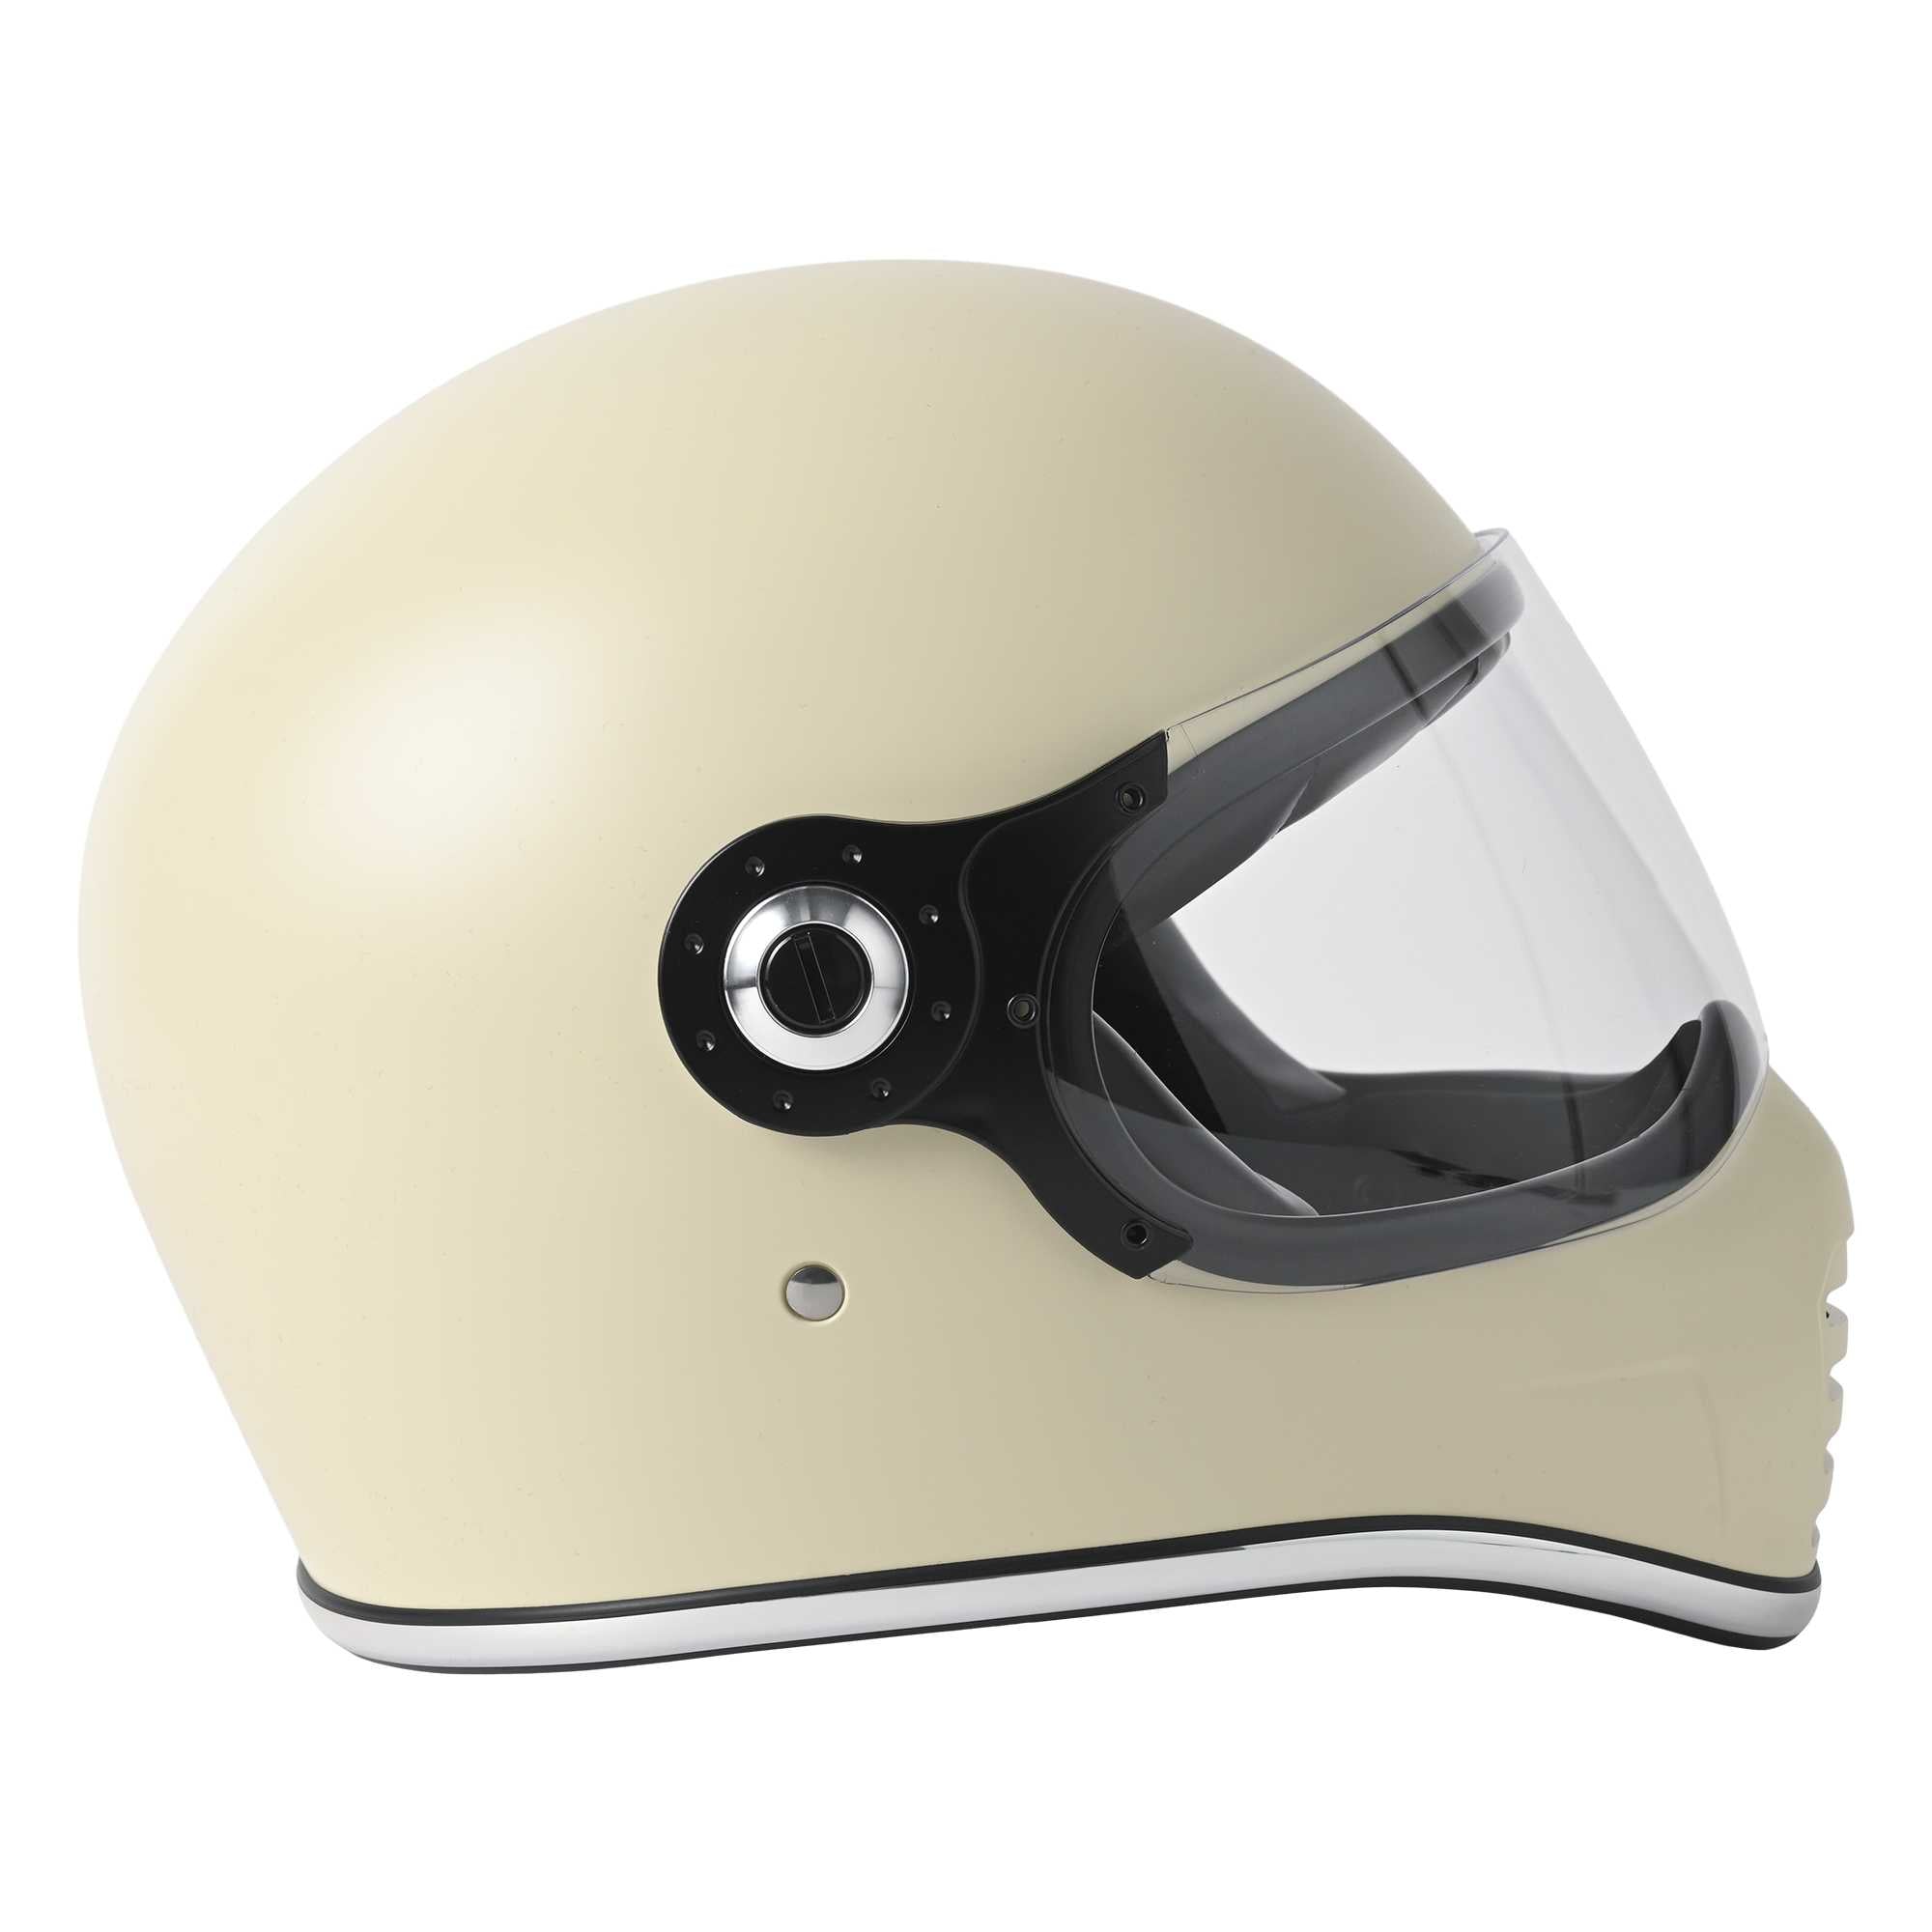 RIDEZ XX 200 Limited Model OFFWHITE Motorcycle Full Face Helmet